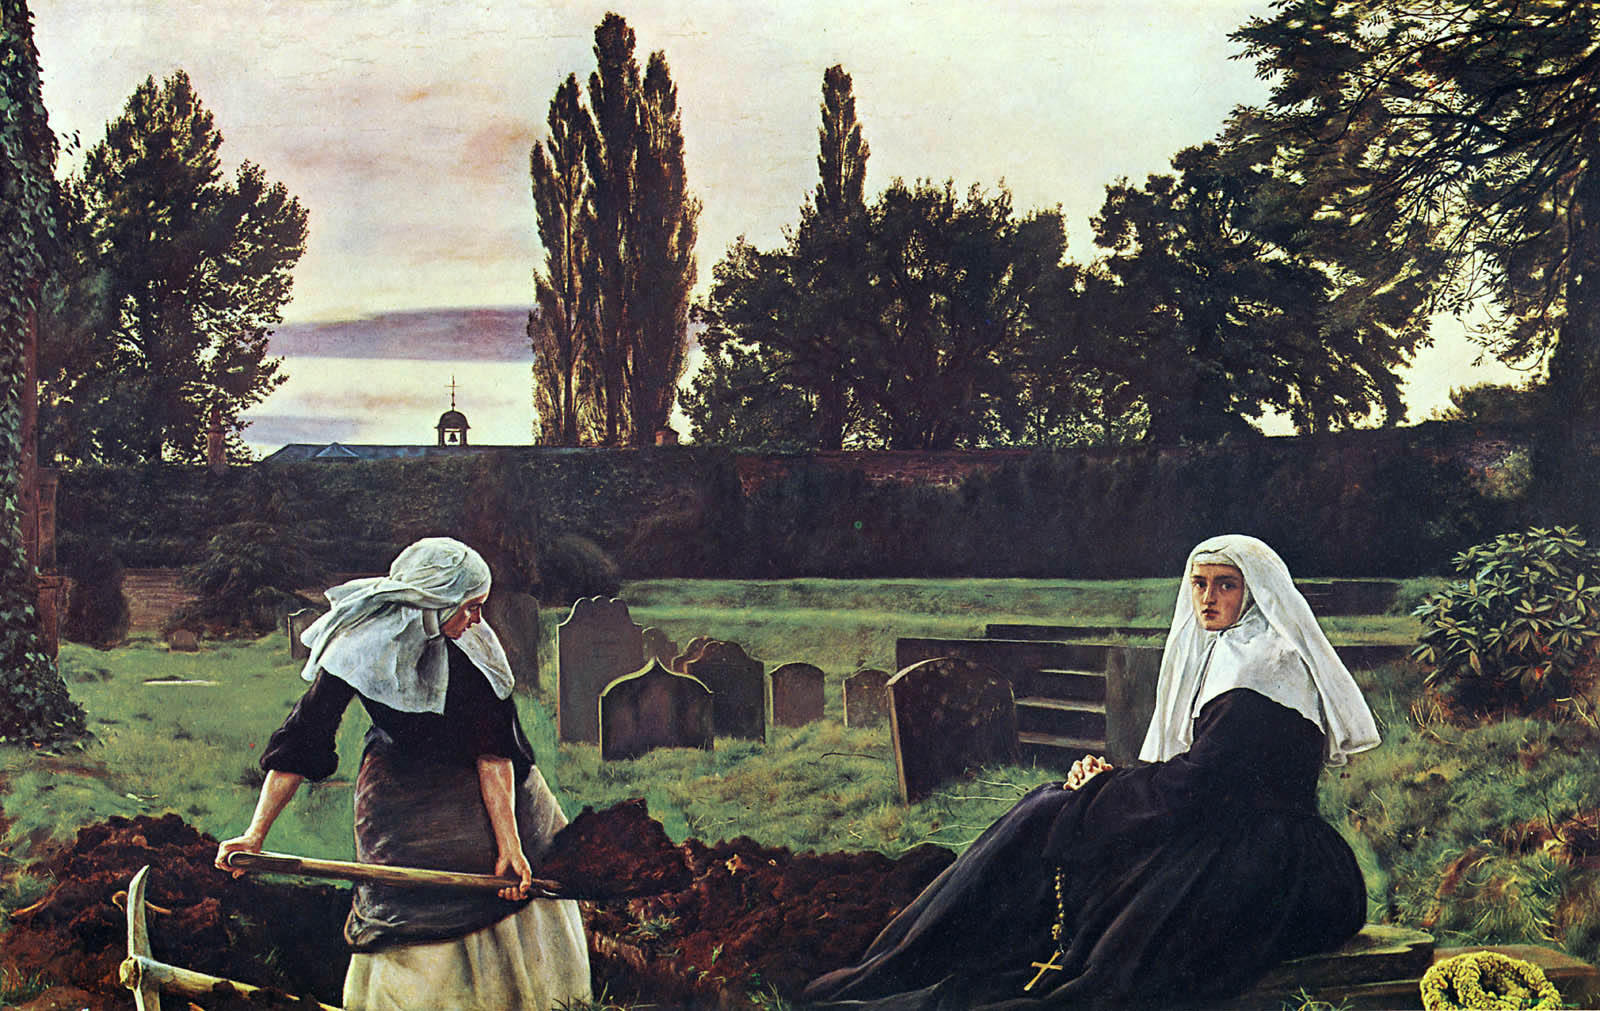 two women digging up some ground in the yard